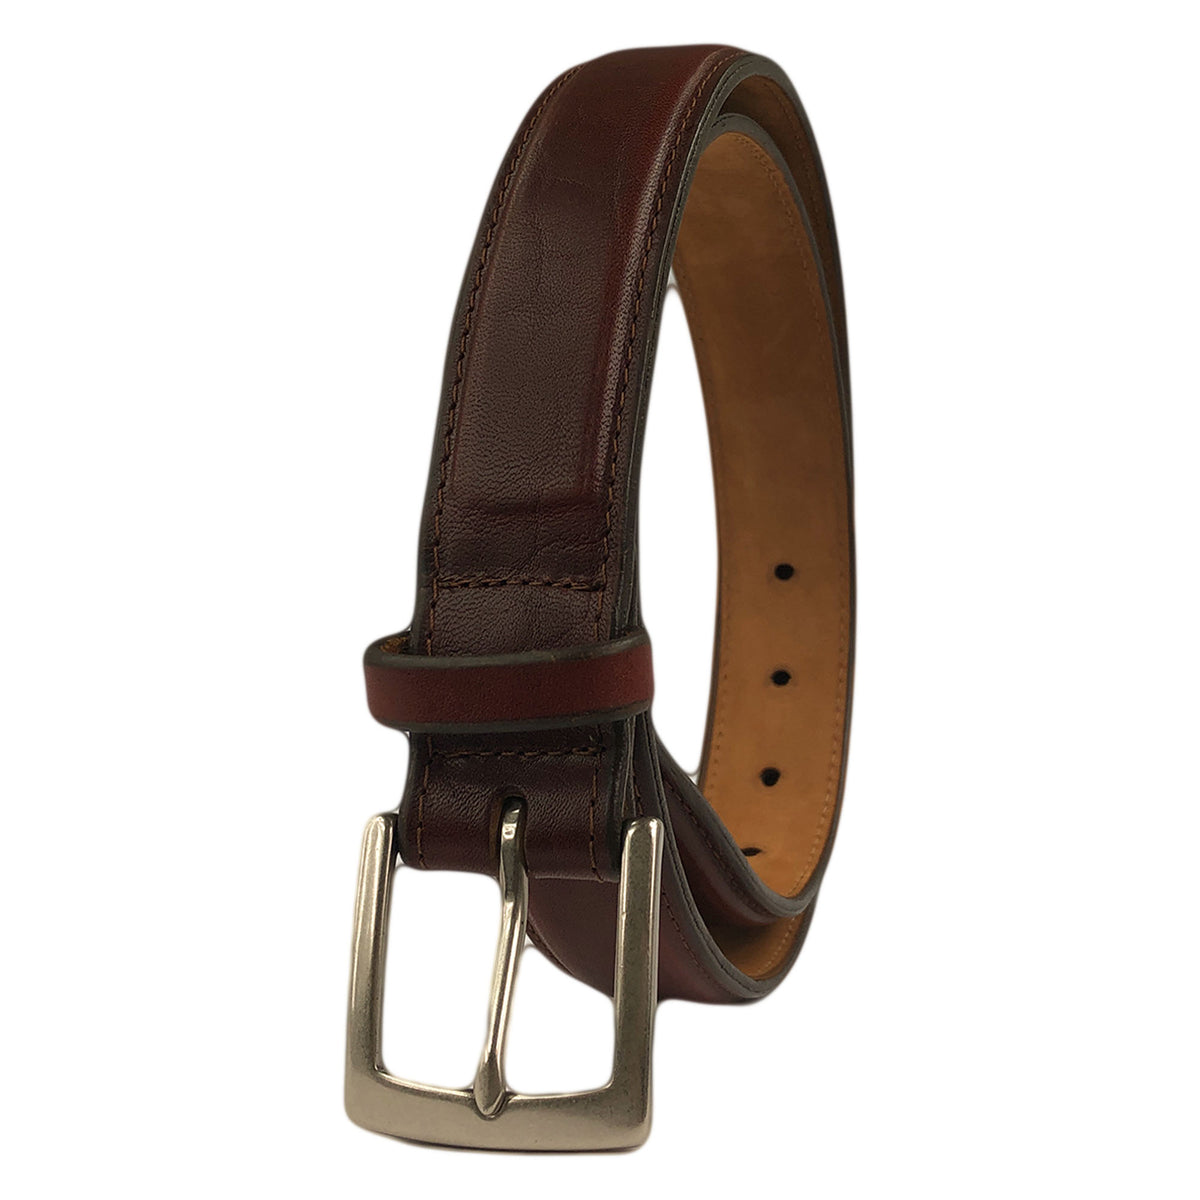 Concealed Carry CCW Leather Gun Belt 1.25